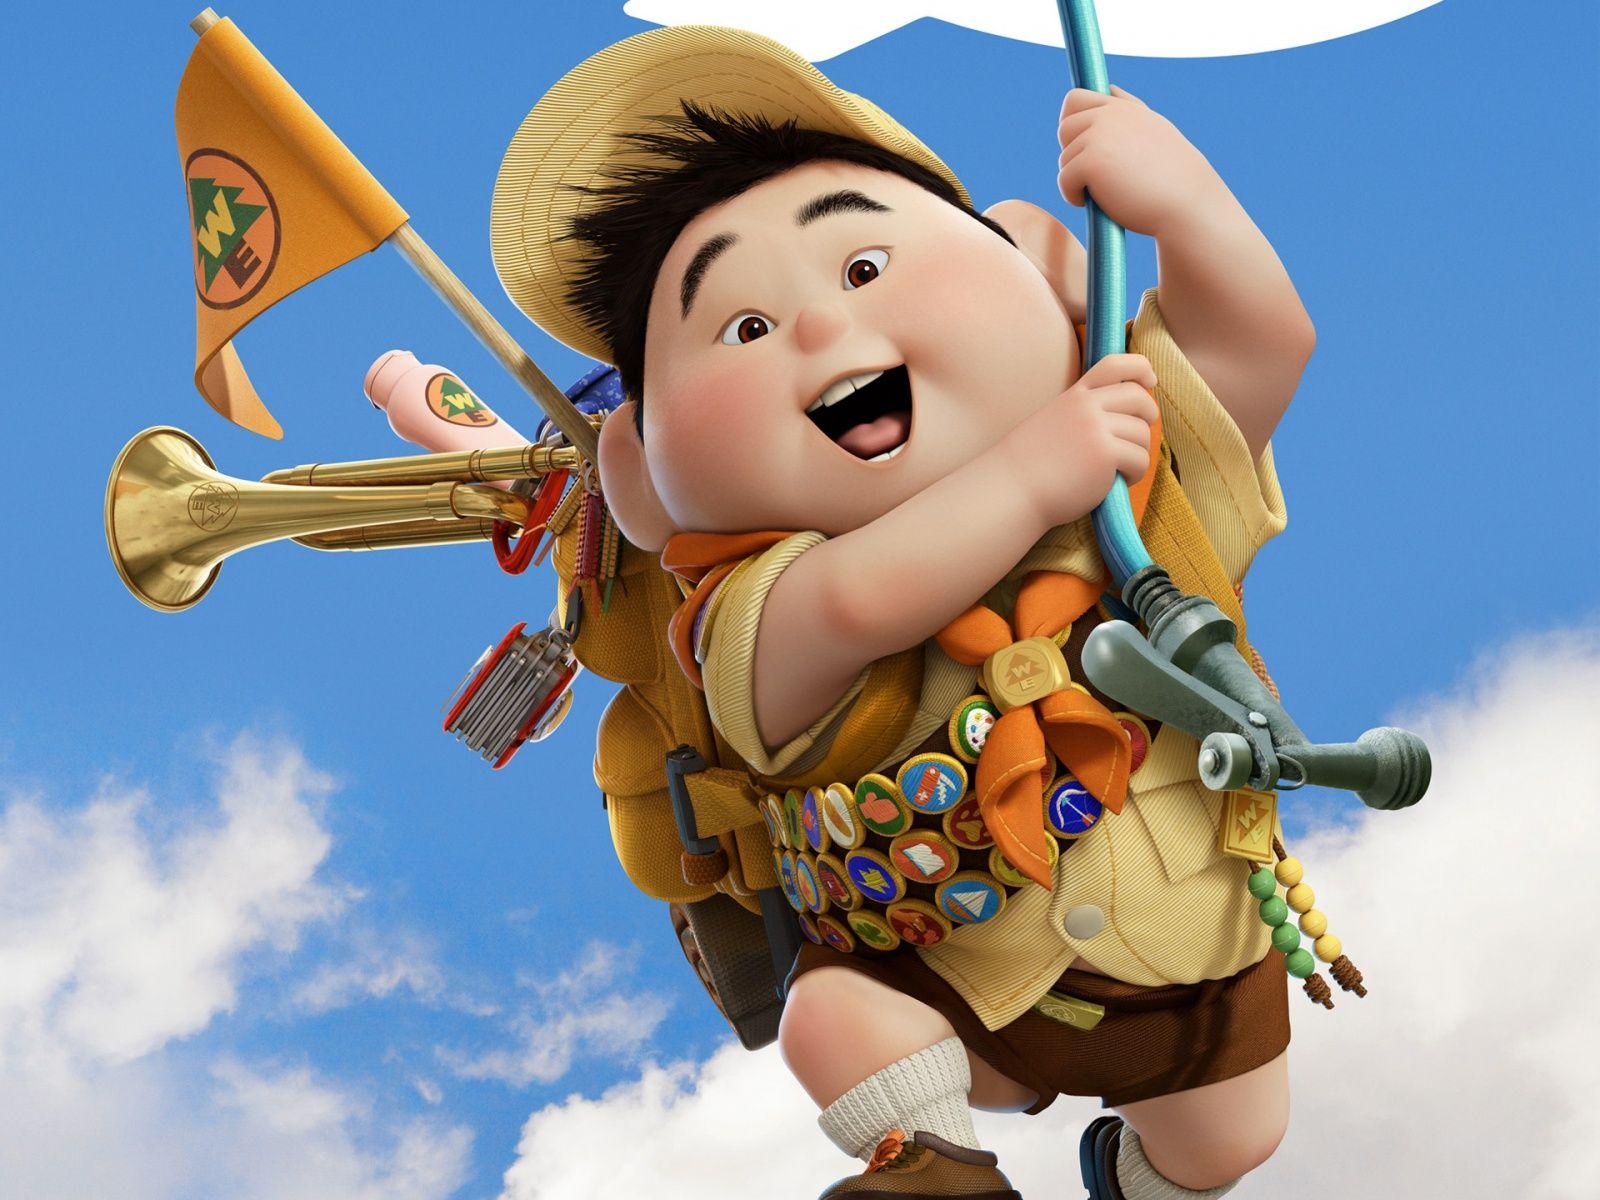 Russell Boy in Pixar's UP Wallpaper in jpg format for free download